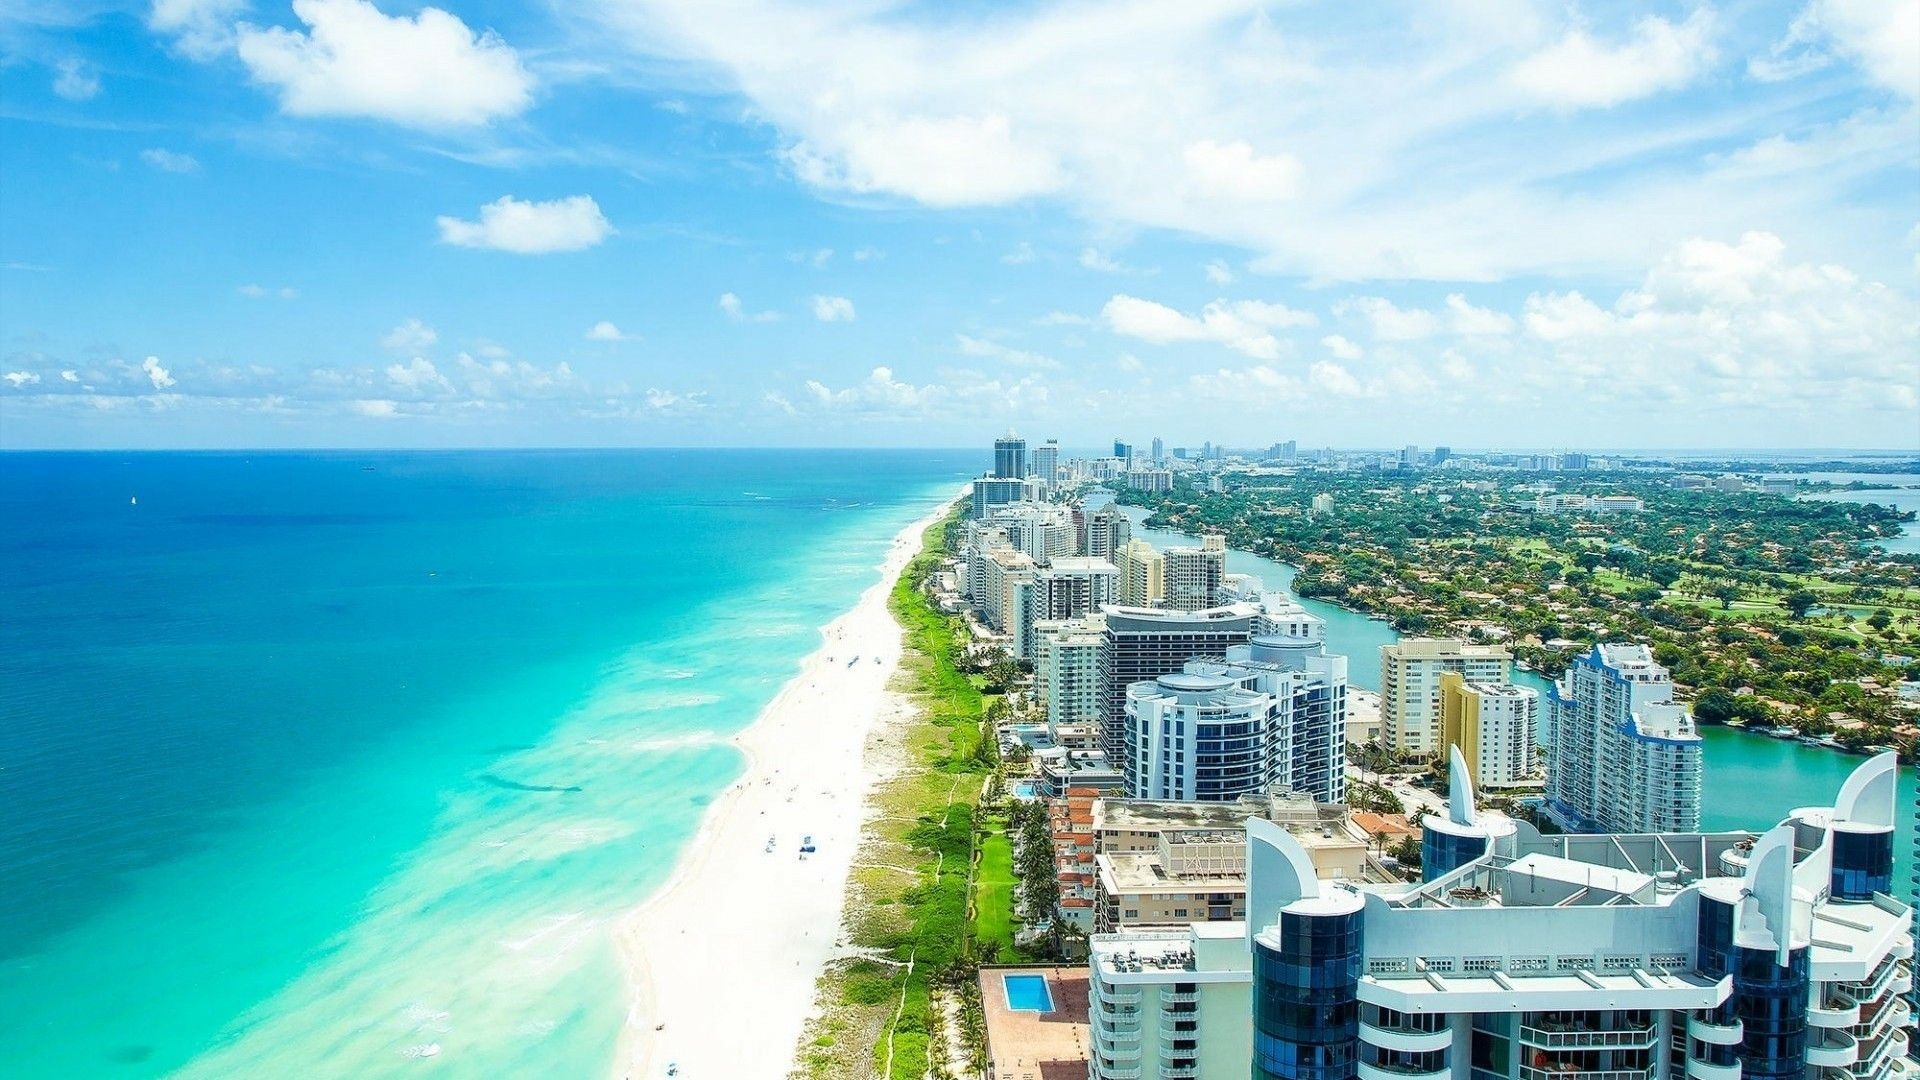 Florida: Miami Beach, located on natural and man-made barrier islands between the Atlantic Ocean and Biscayne Bay. 1920x1080 Full HD Wallpaper.